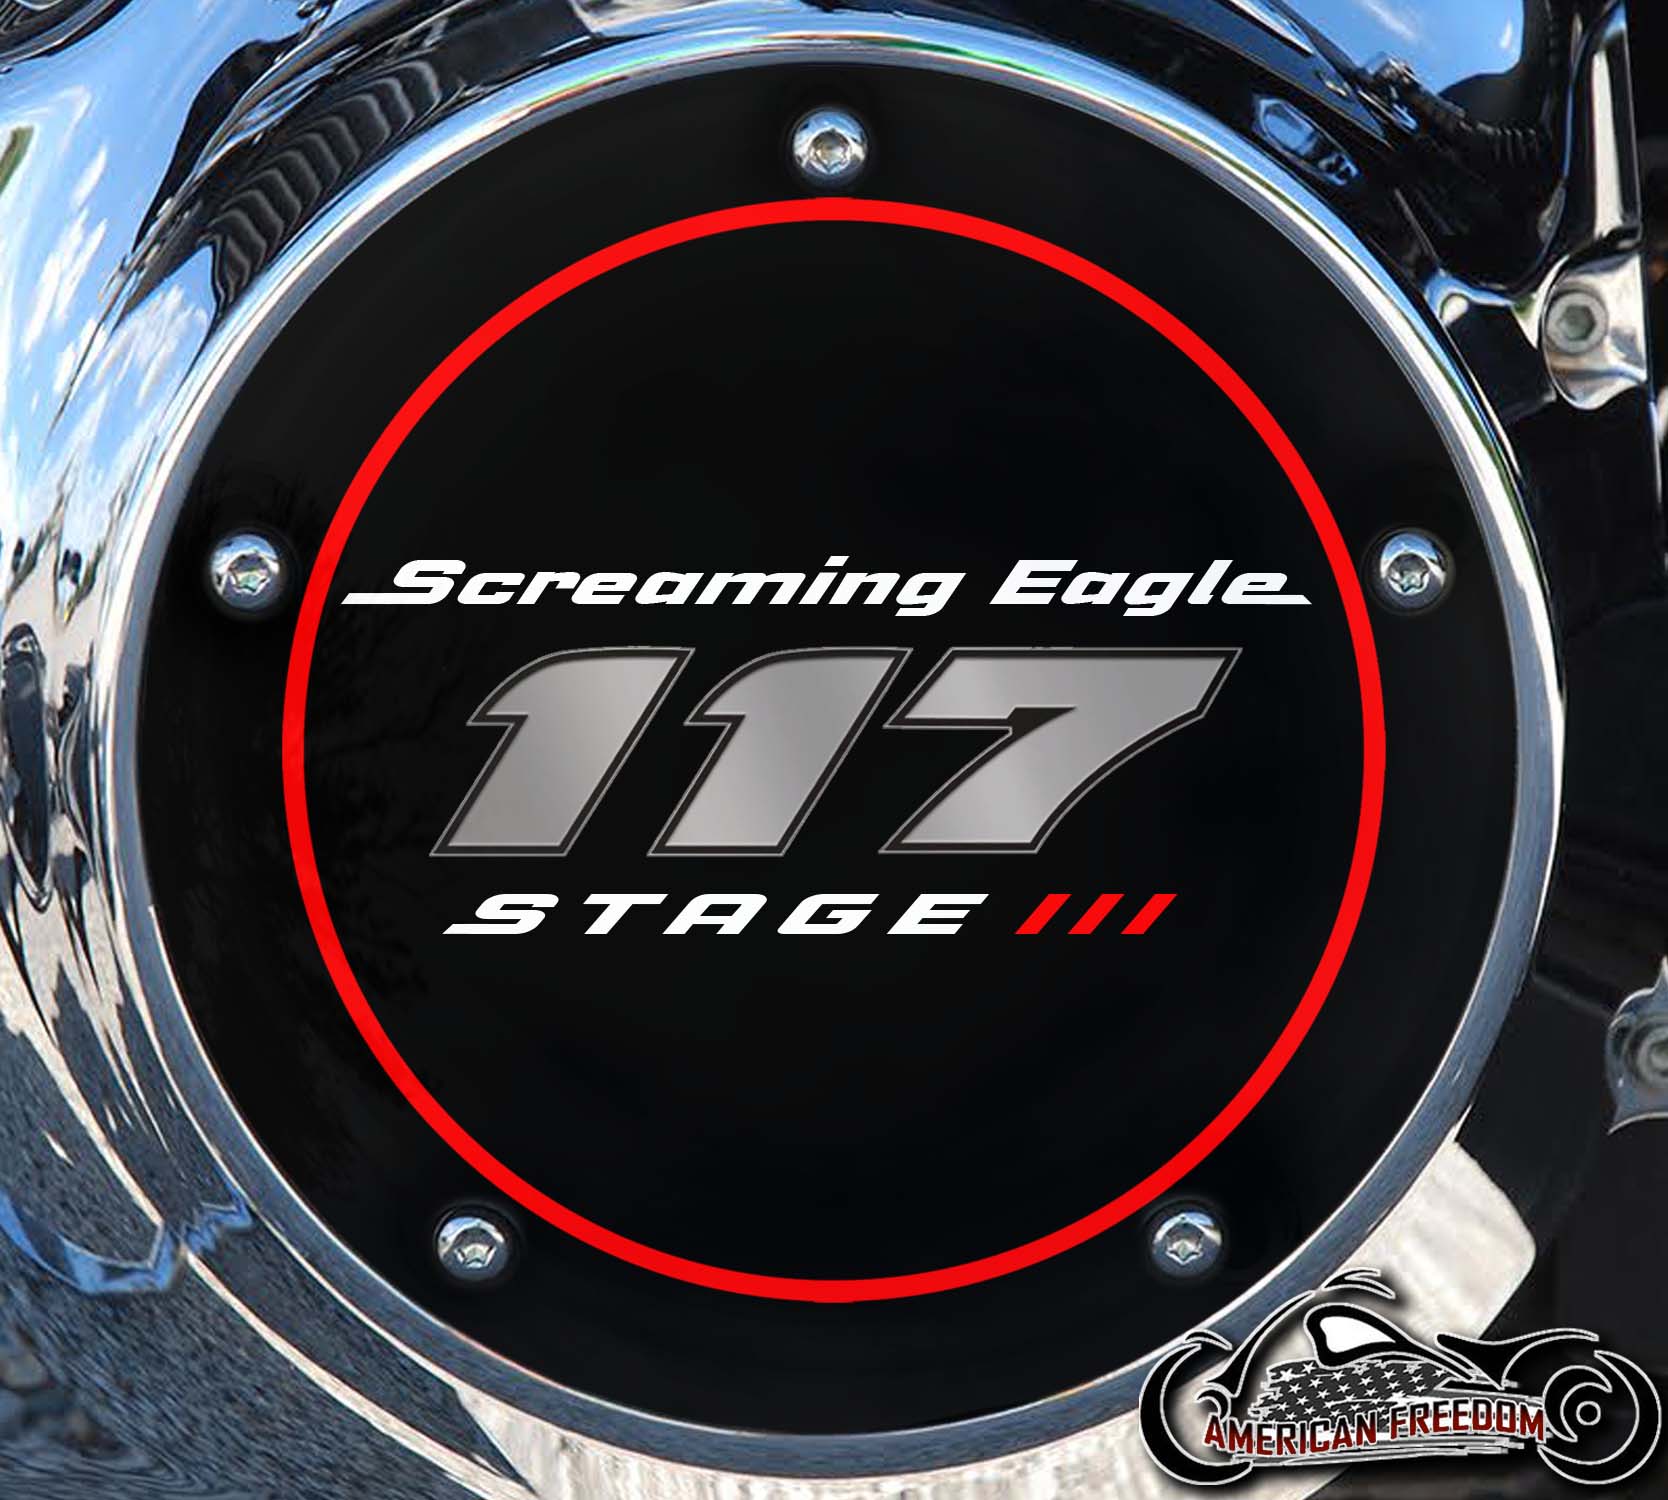 Screaming Eagle Stage III 117 Derby Cover OL